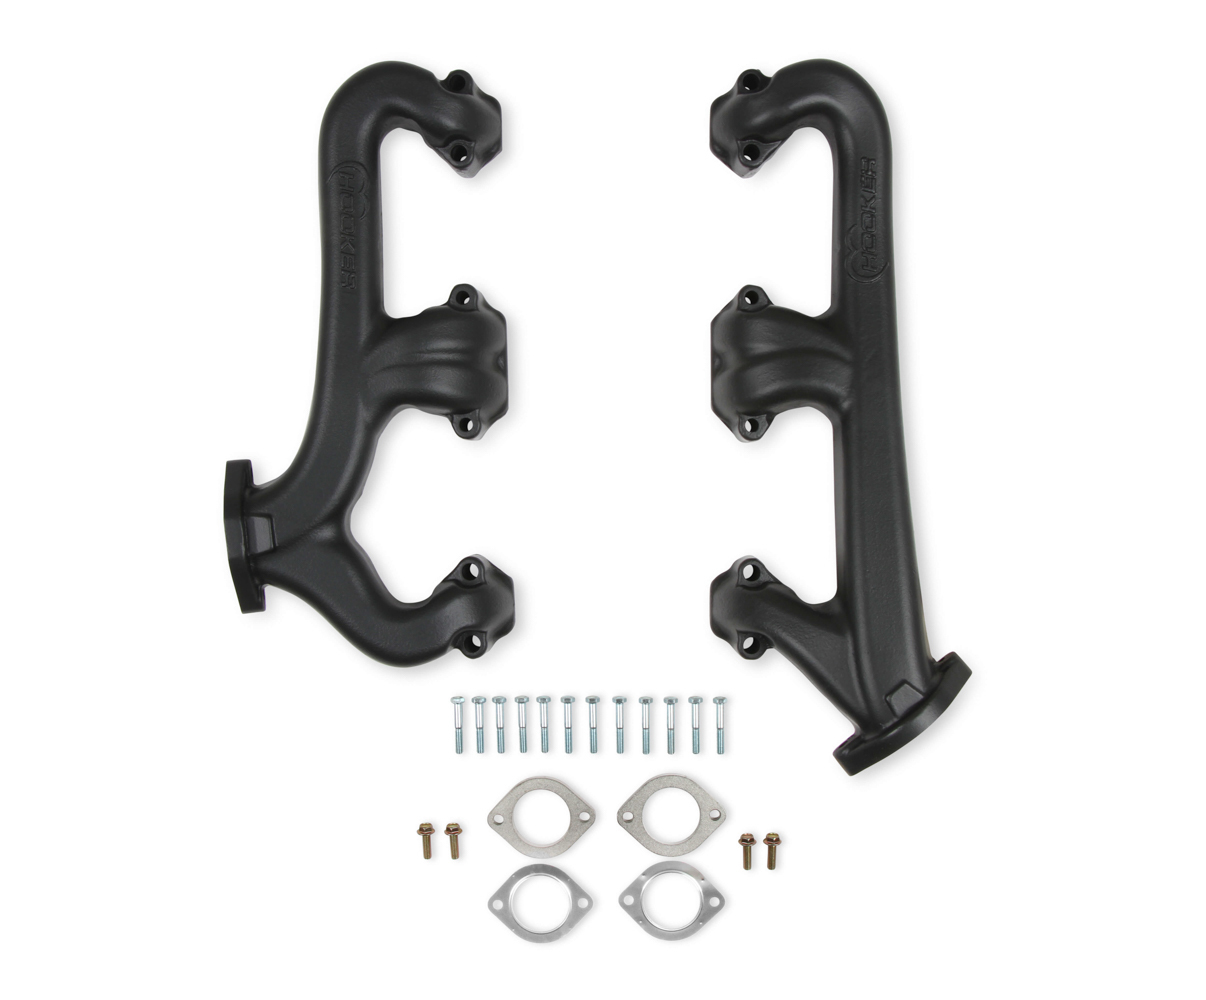 Hooker Headers 8527-3HKR Exhaust Manifold, 2.50 in Outlet, Raised D Port, Iron, Black Ceramic, Small Block Chevy, Pair